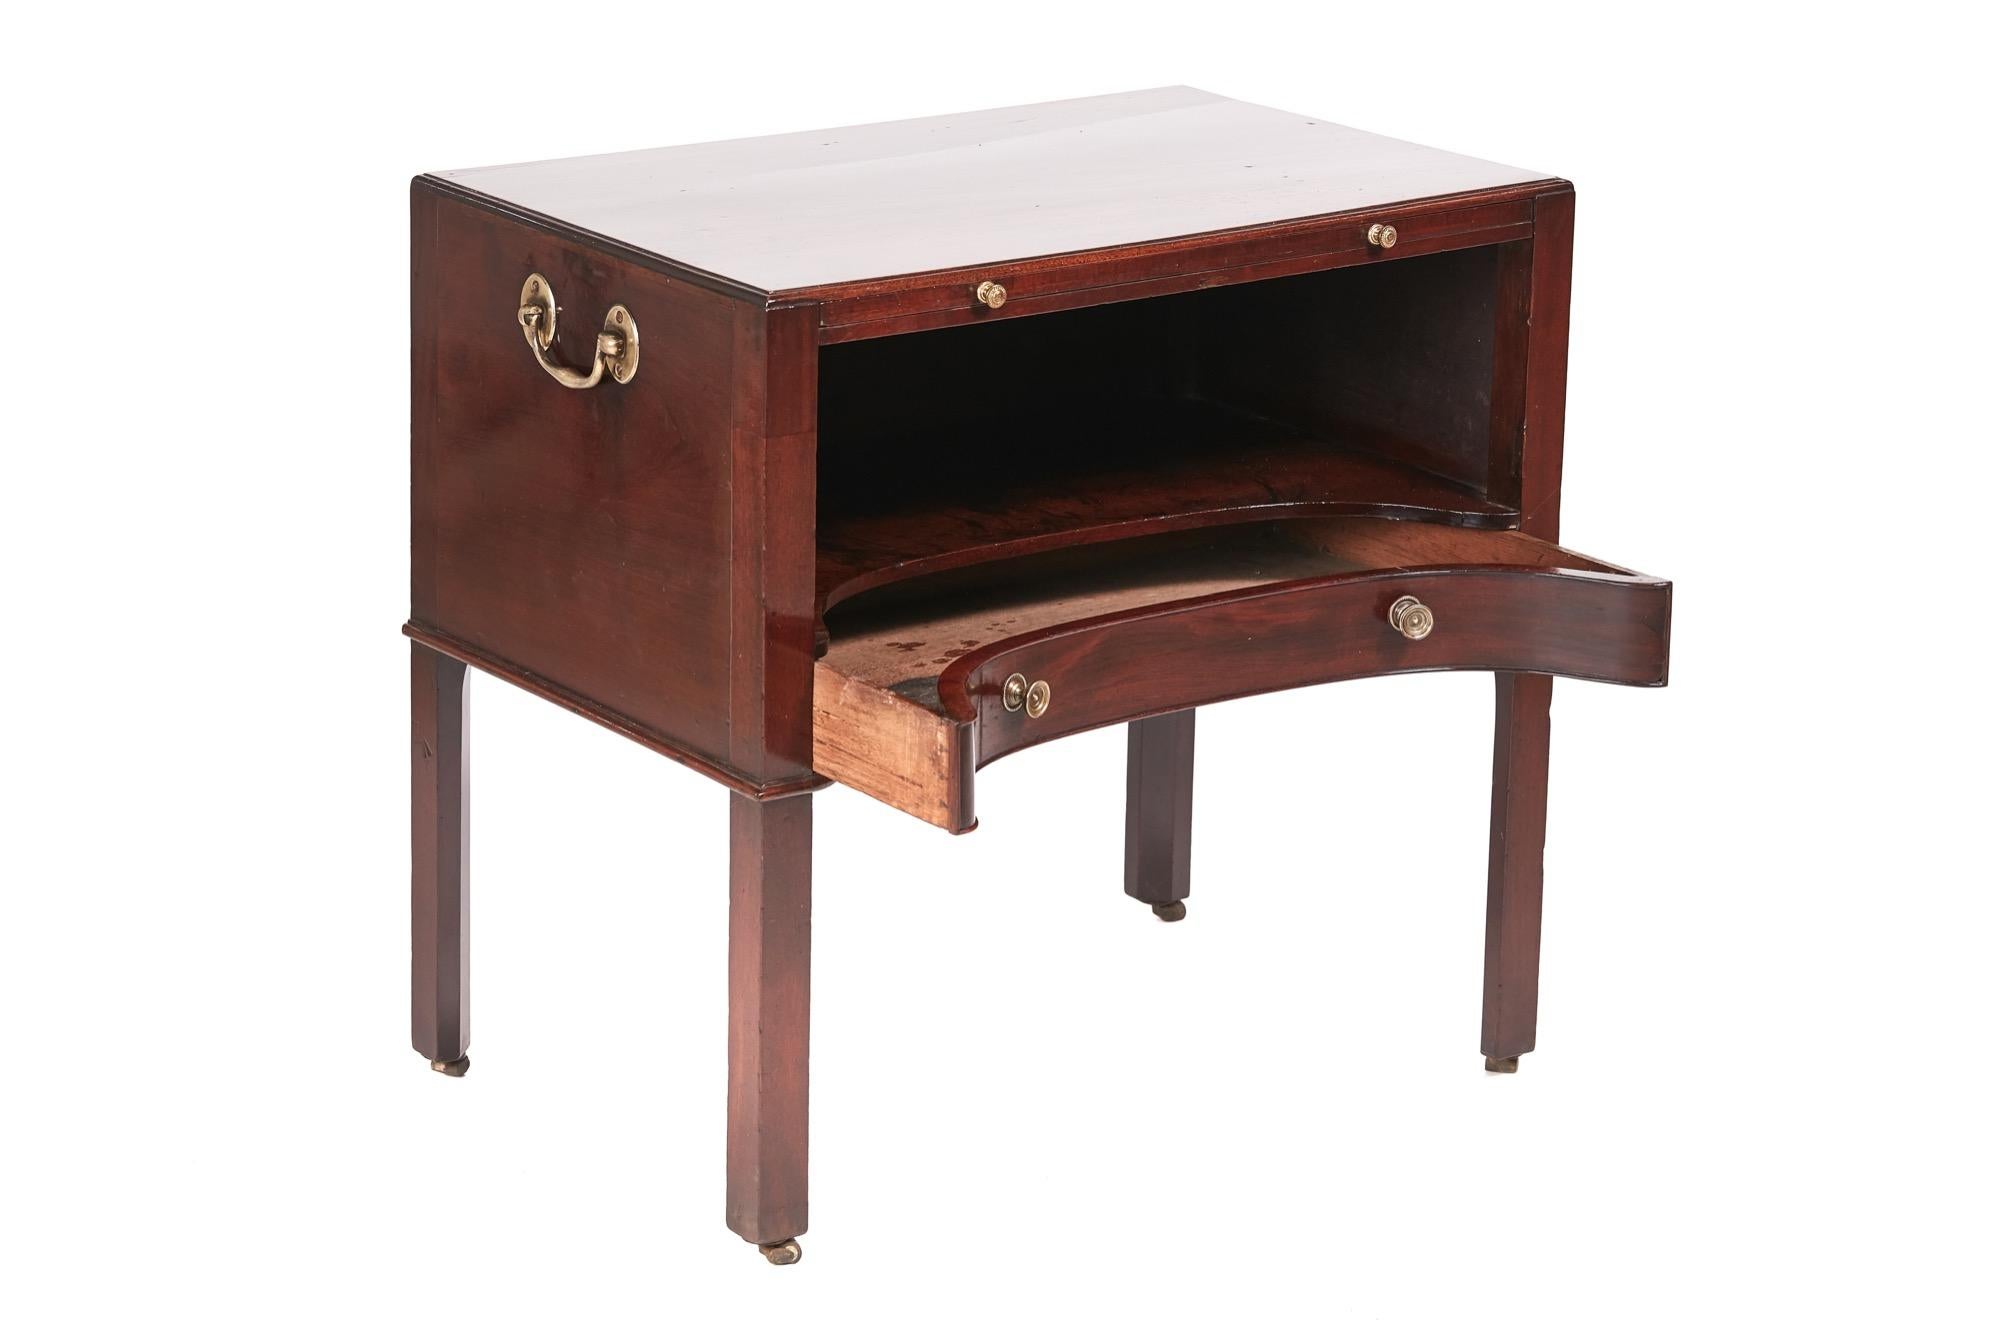 This is an unusual George III antique mahogany bedside table with a lovely quality mahogany shaped top. It boasts a brushing slide and a shaped drawer with original brass carrying handles. It stands on four elegant square chamfer legs with original